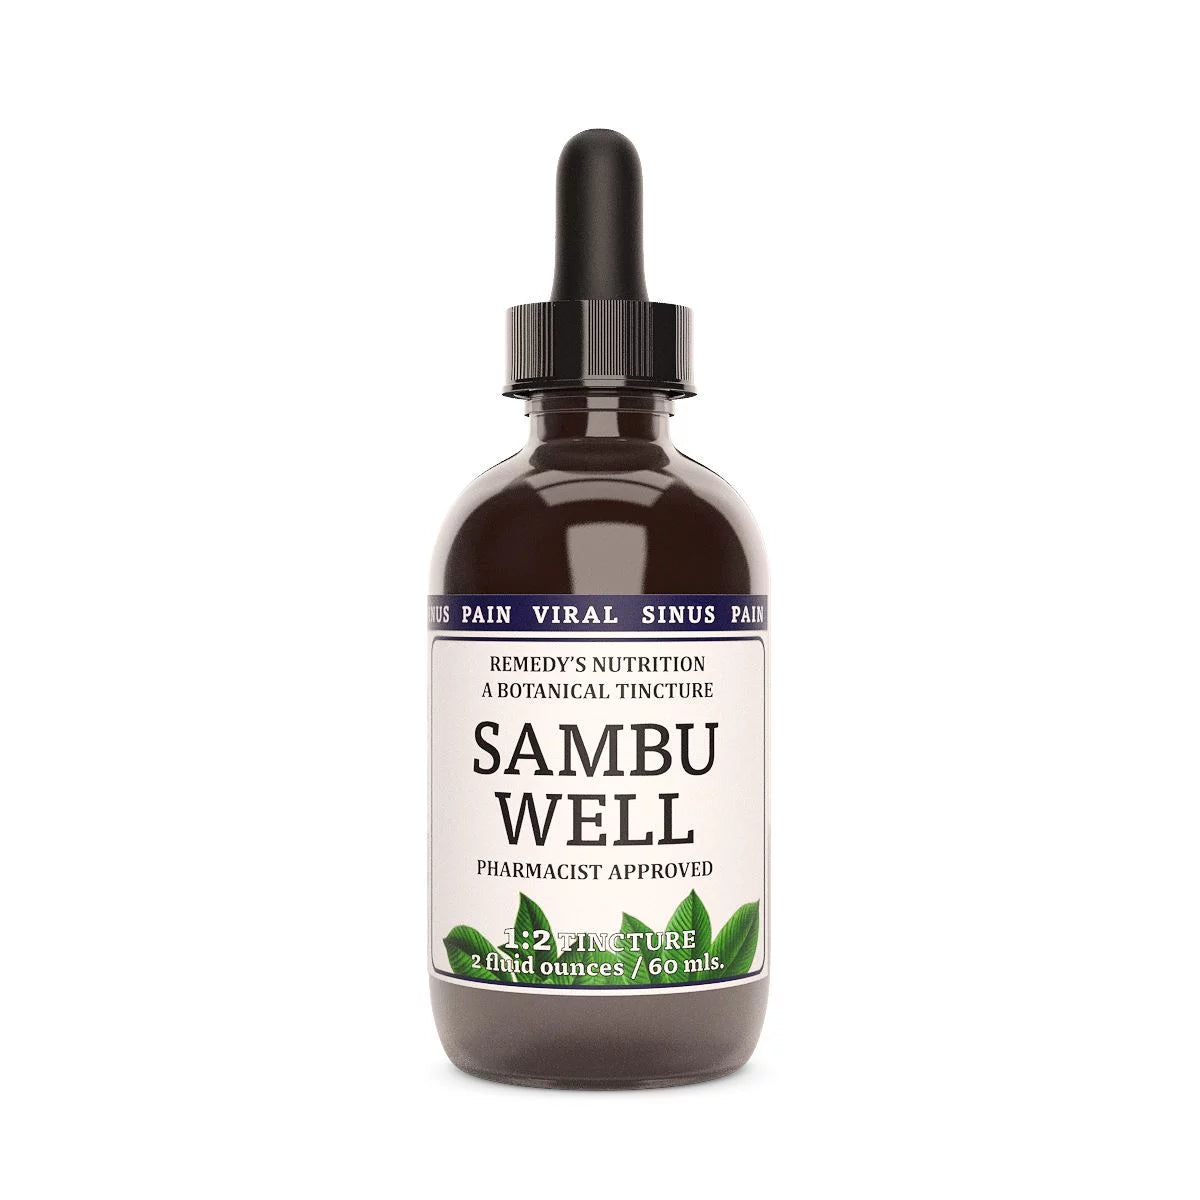 Image of Remedy's Nutrition® Sambu Well Tincture Dietary Supplement front bottle. Made in the USA. 